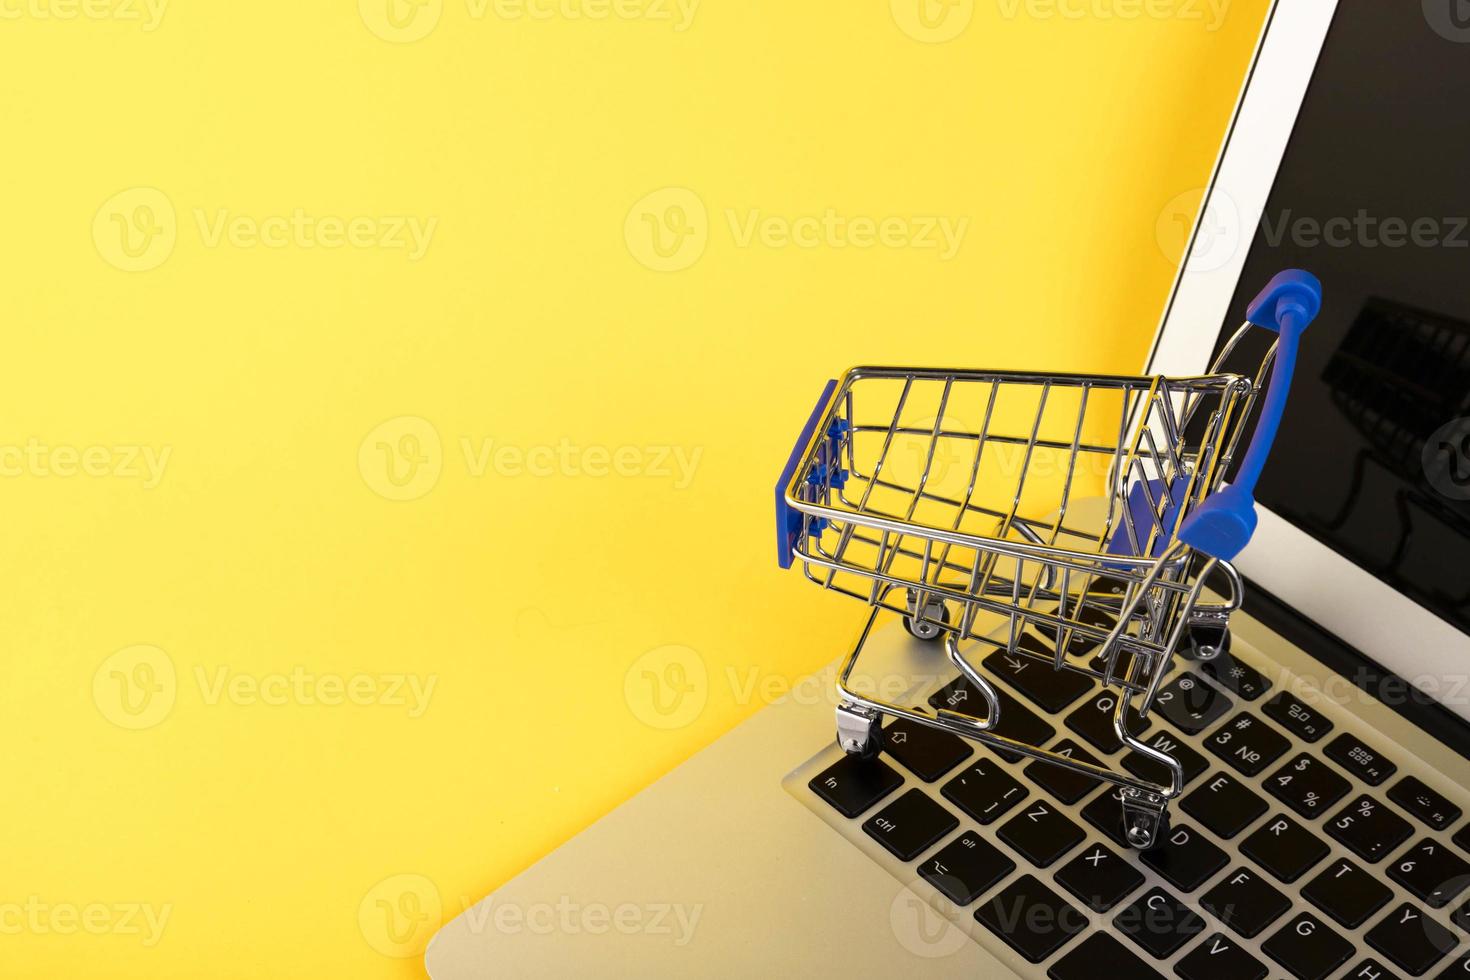 Empty mini shopping trolley, Shopping cart, on a yellow background. RFI Request for information. copy space photo